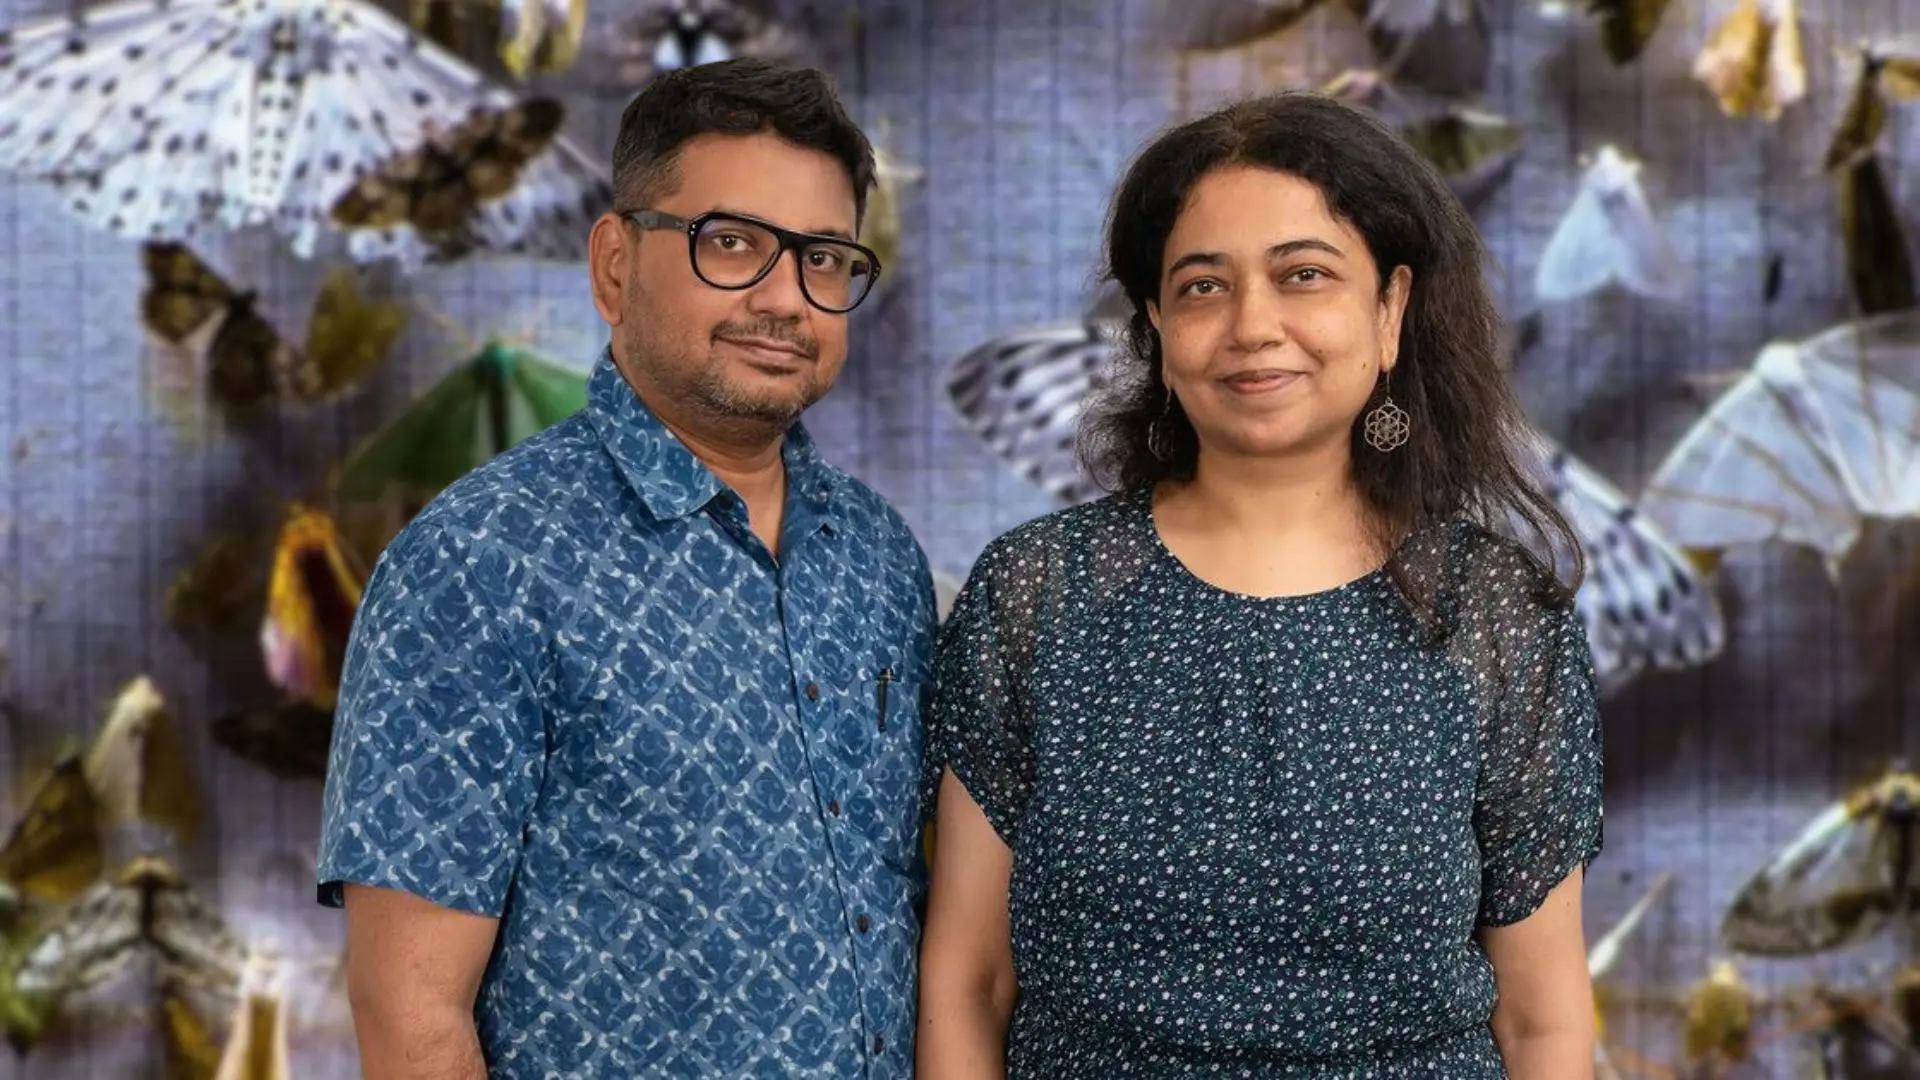 For Your Reference - Interview with "Flickering Lights" Directors, Anupama Srinivasan and Anirban Dutta